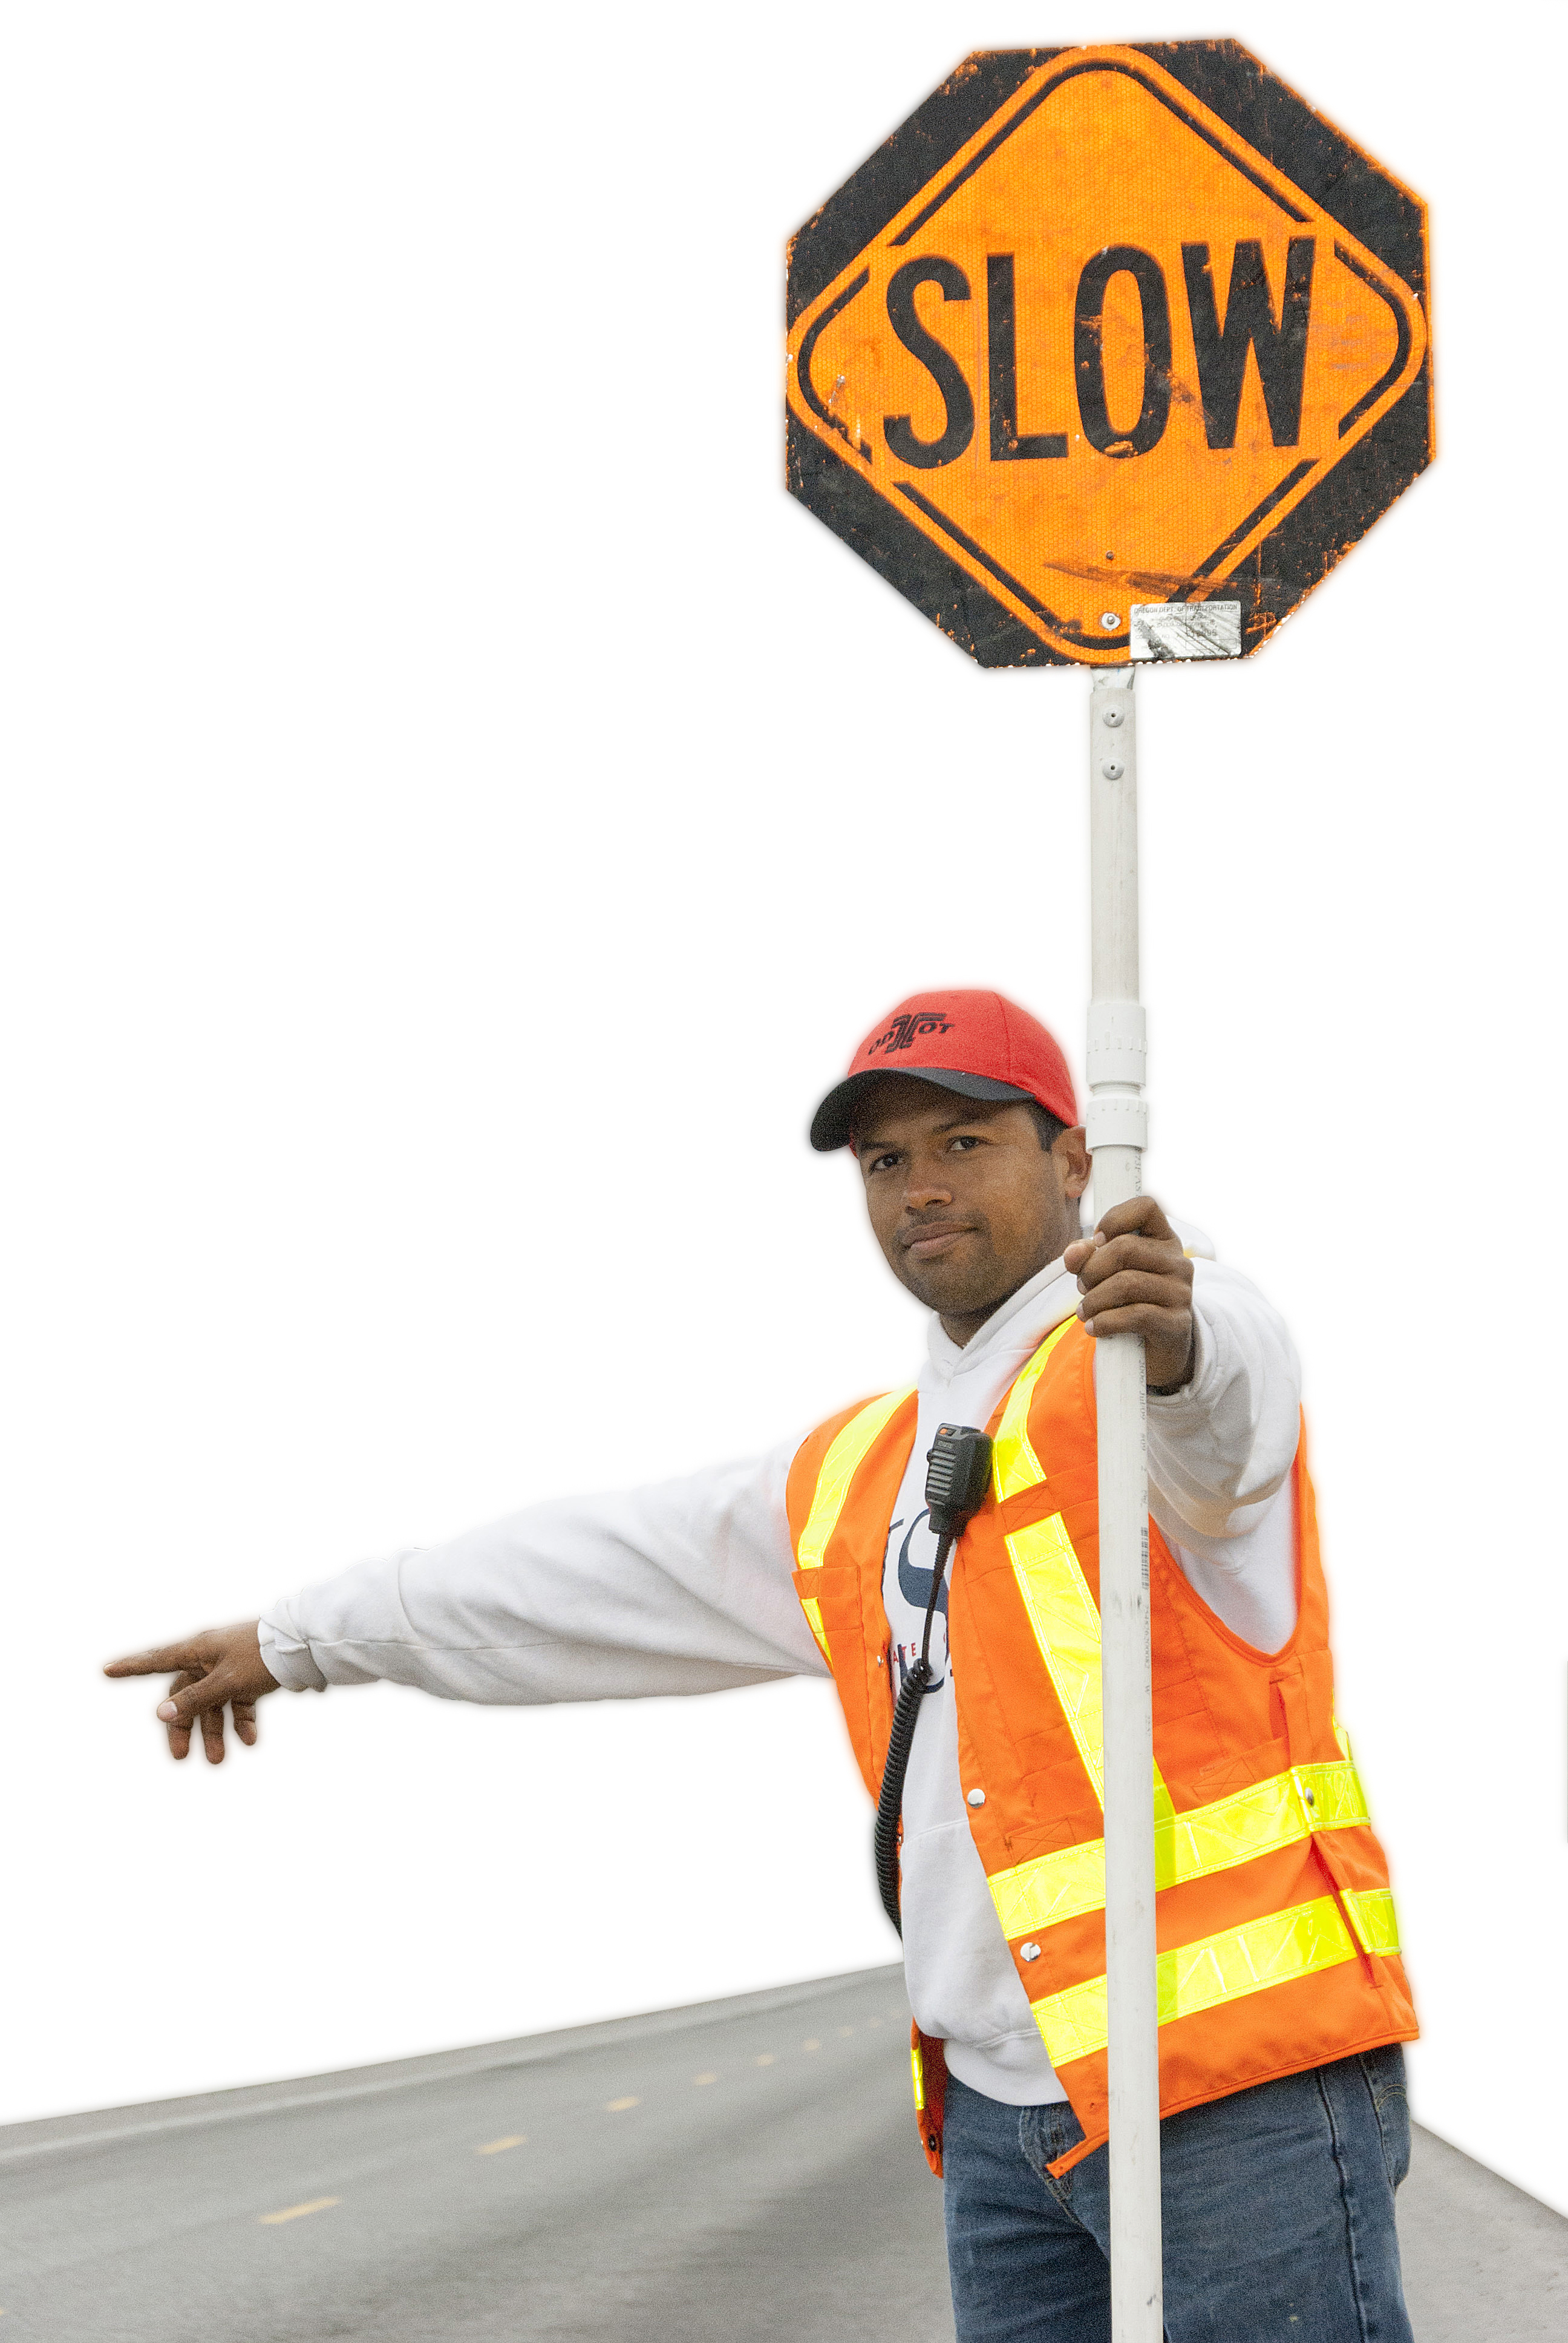 Flagger pointing holding slow sign